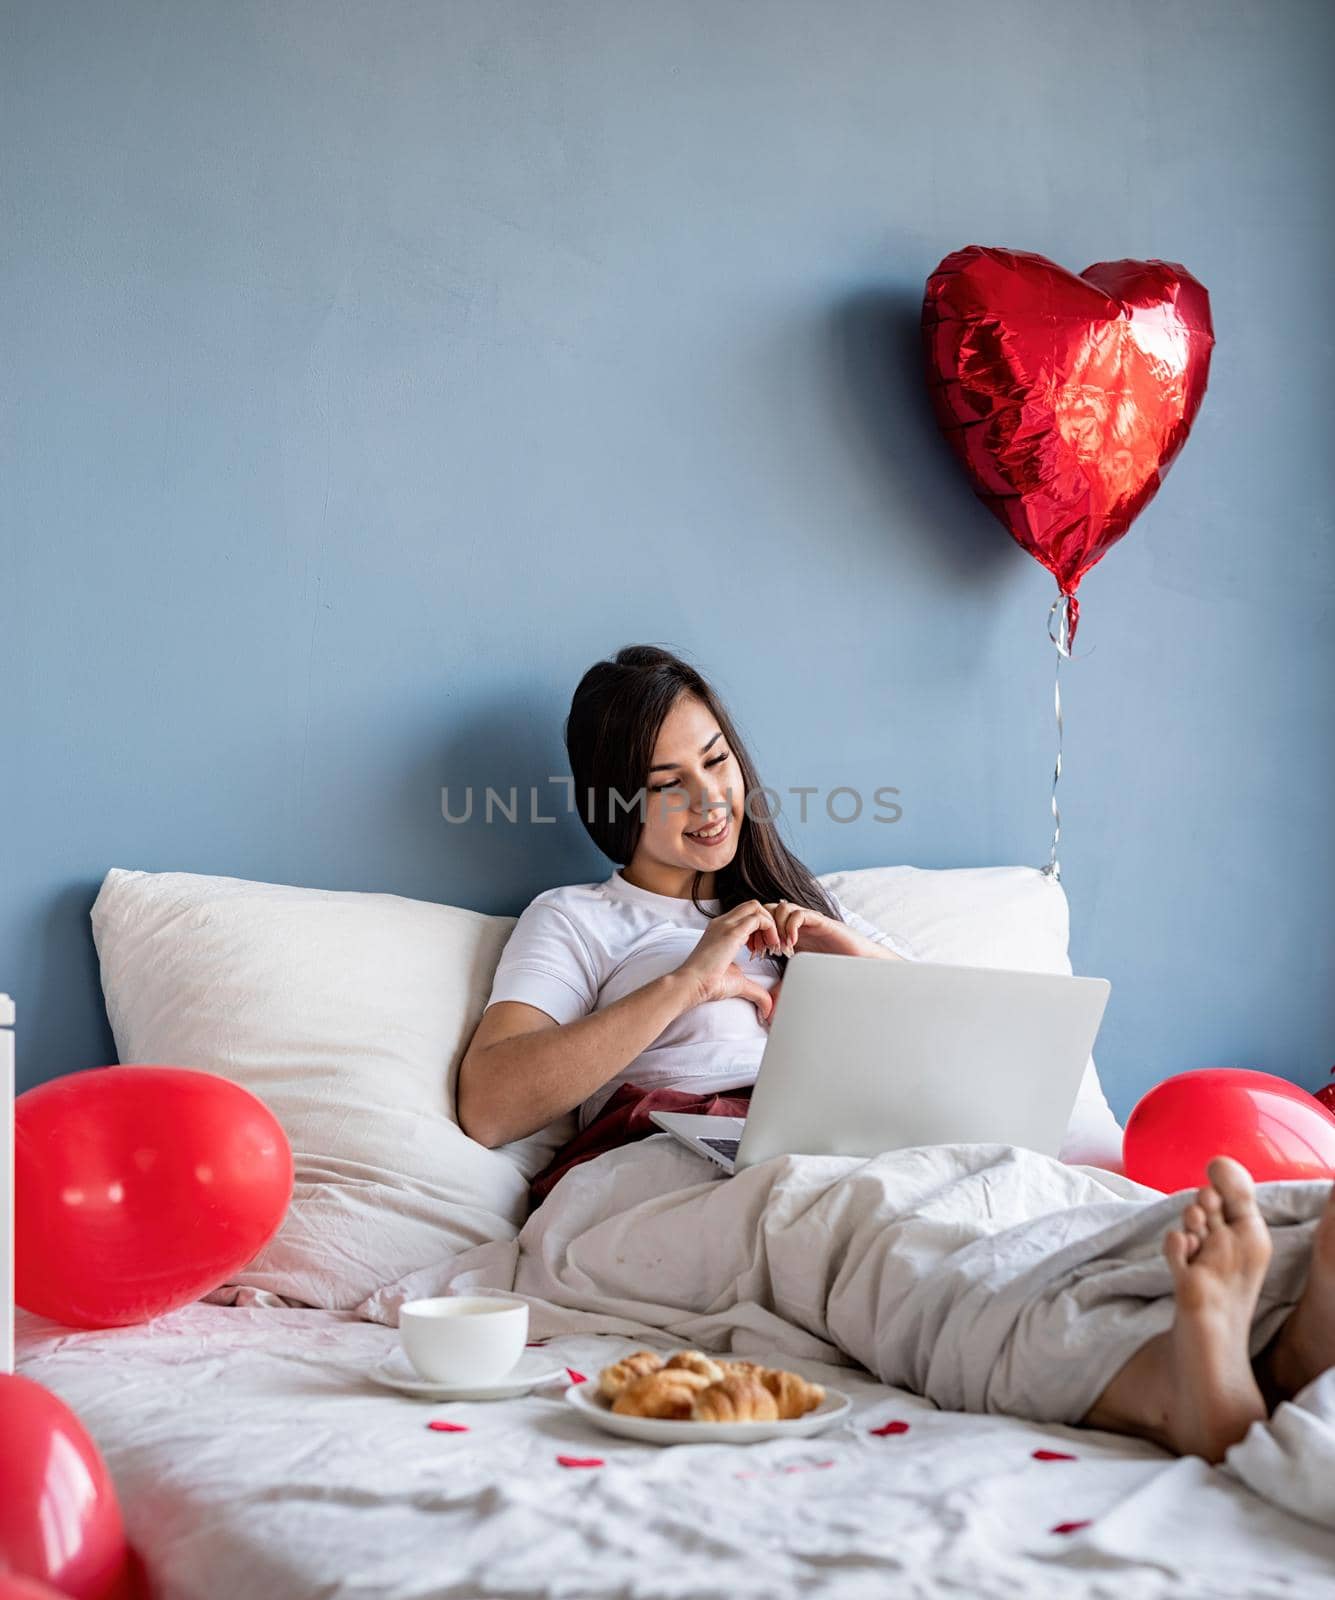 Valentines Day. Young happy brunette woman sitting in the bed with red heart shaped balloons chatting with her boyfriend on laptop showing heart gesture with hands